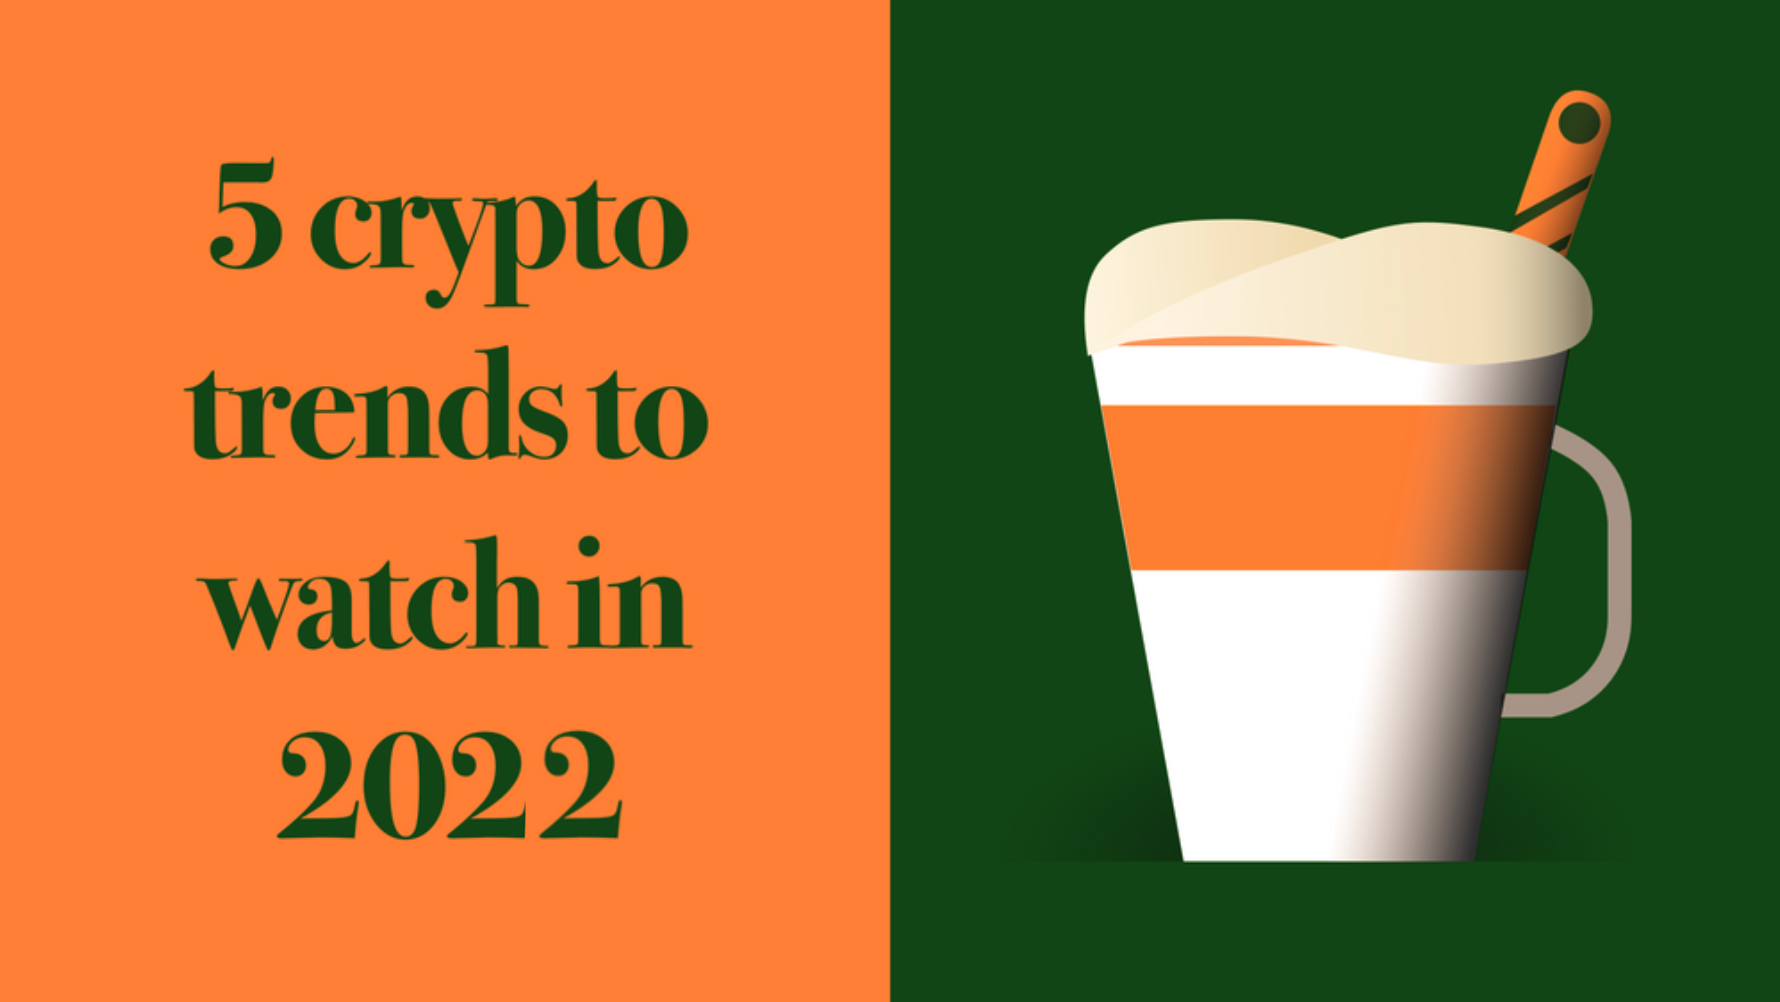 5 crypto trends to watch in 2022